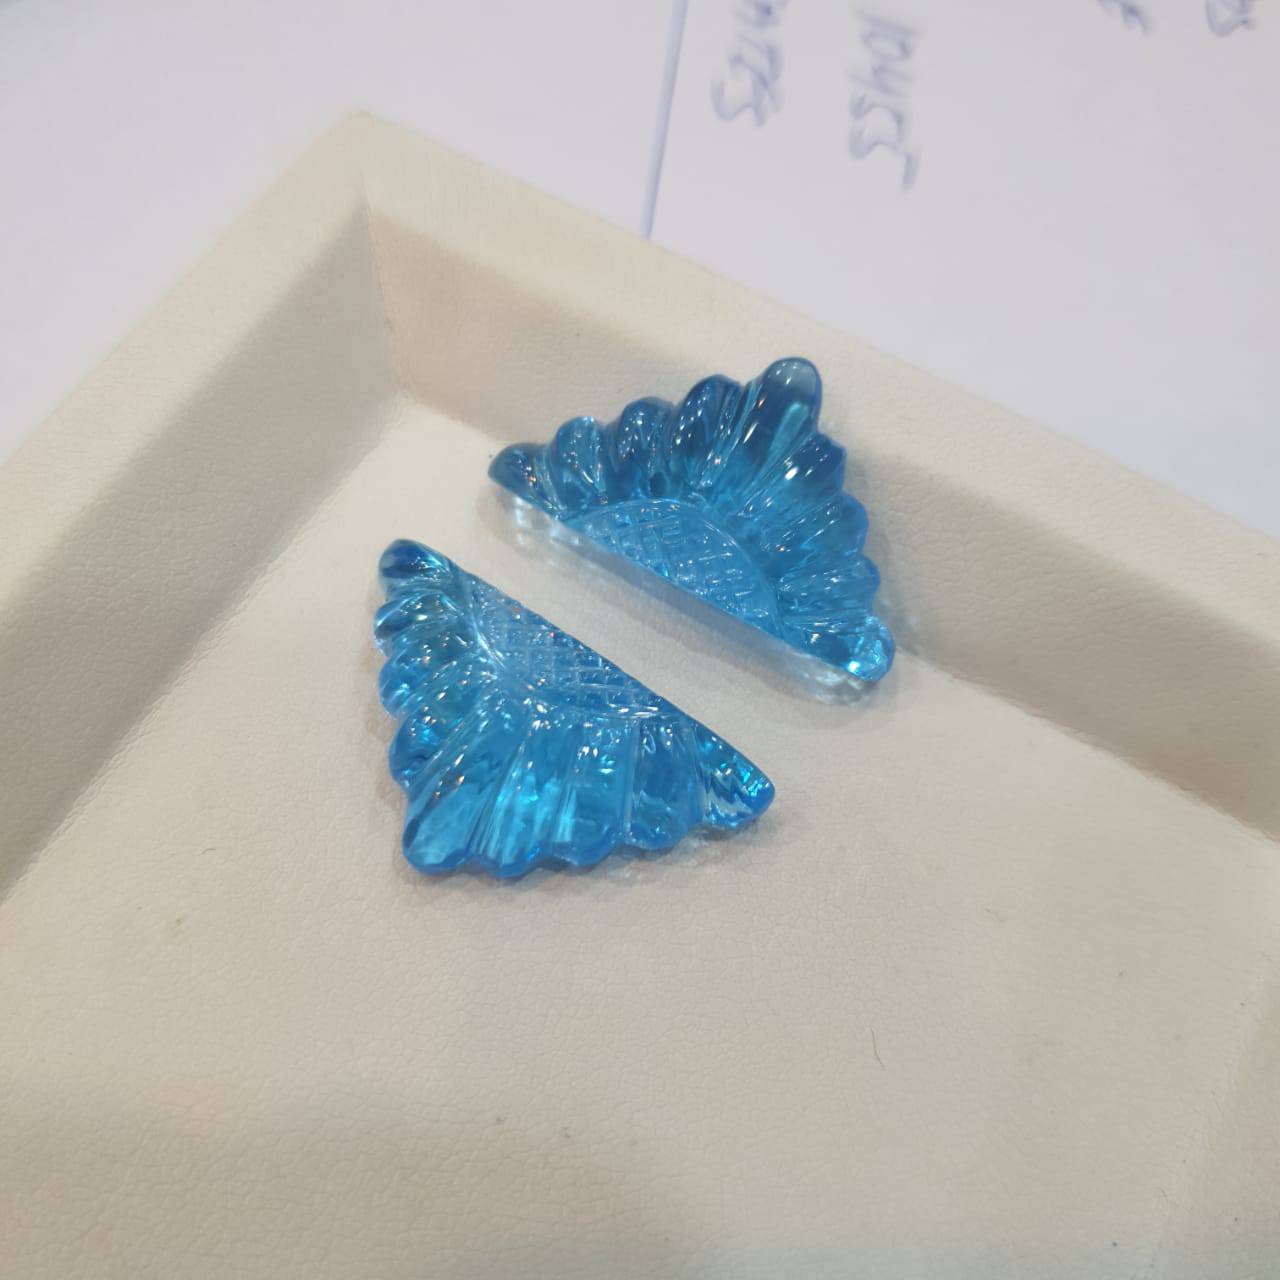 Perfect Pair Blue Topaz 42.25cts / 27x15mm  / One of a Kind Lot - The LabradoriteKing